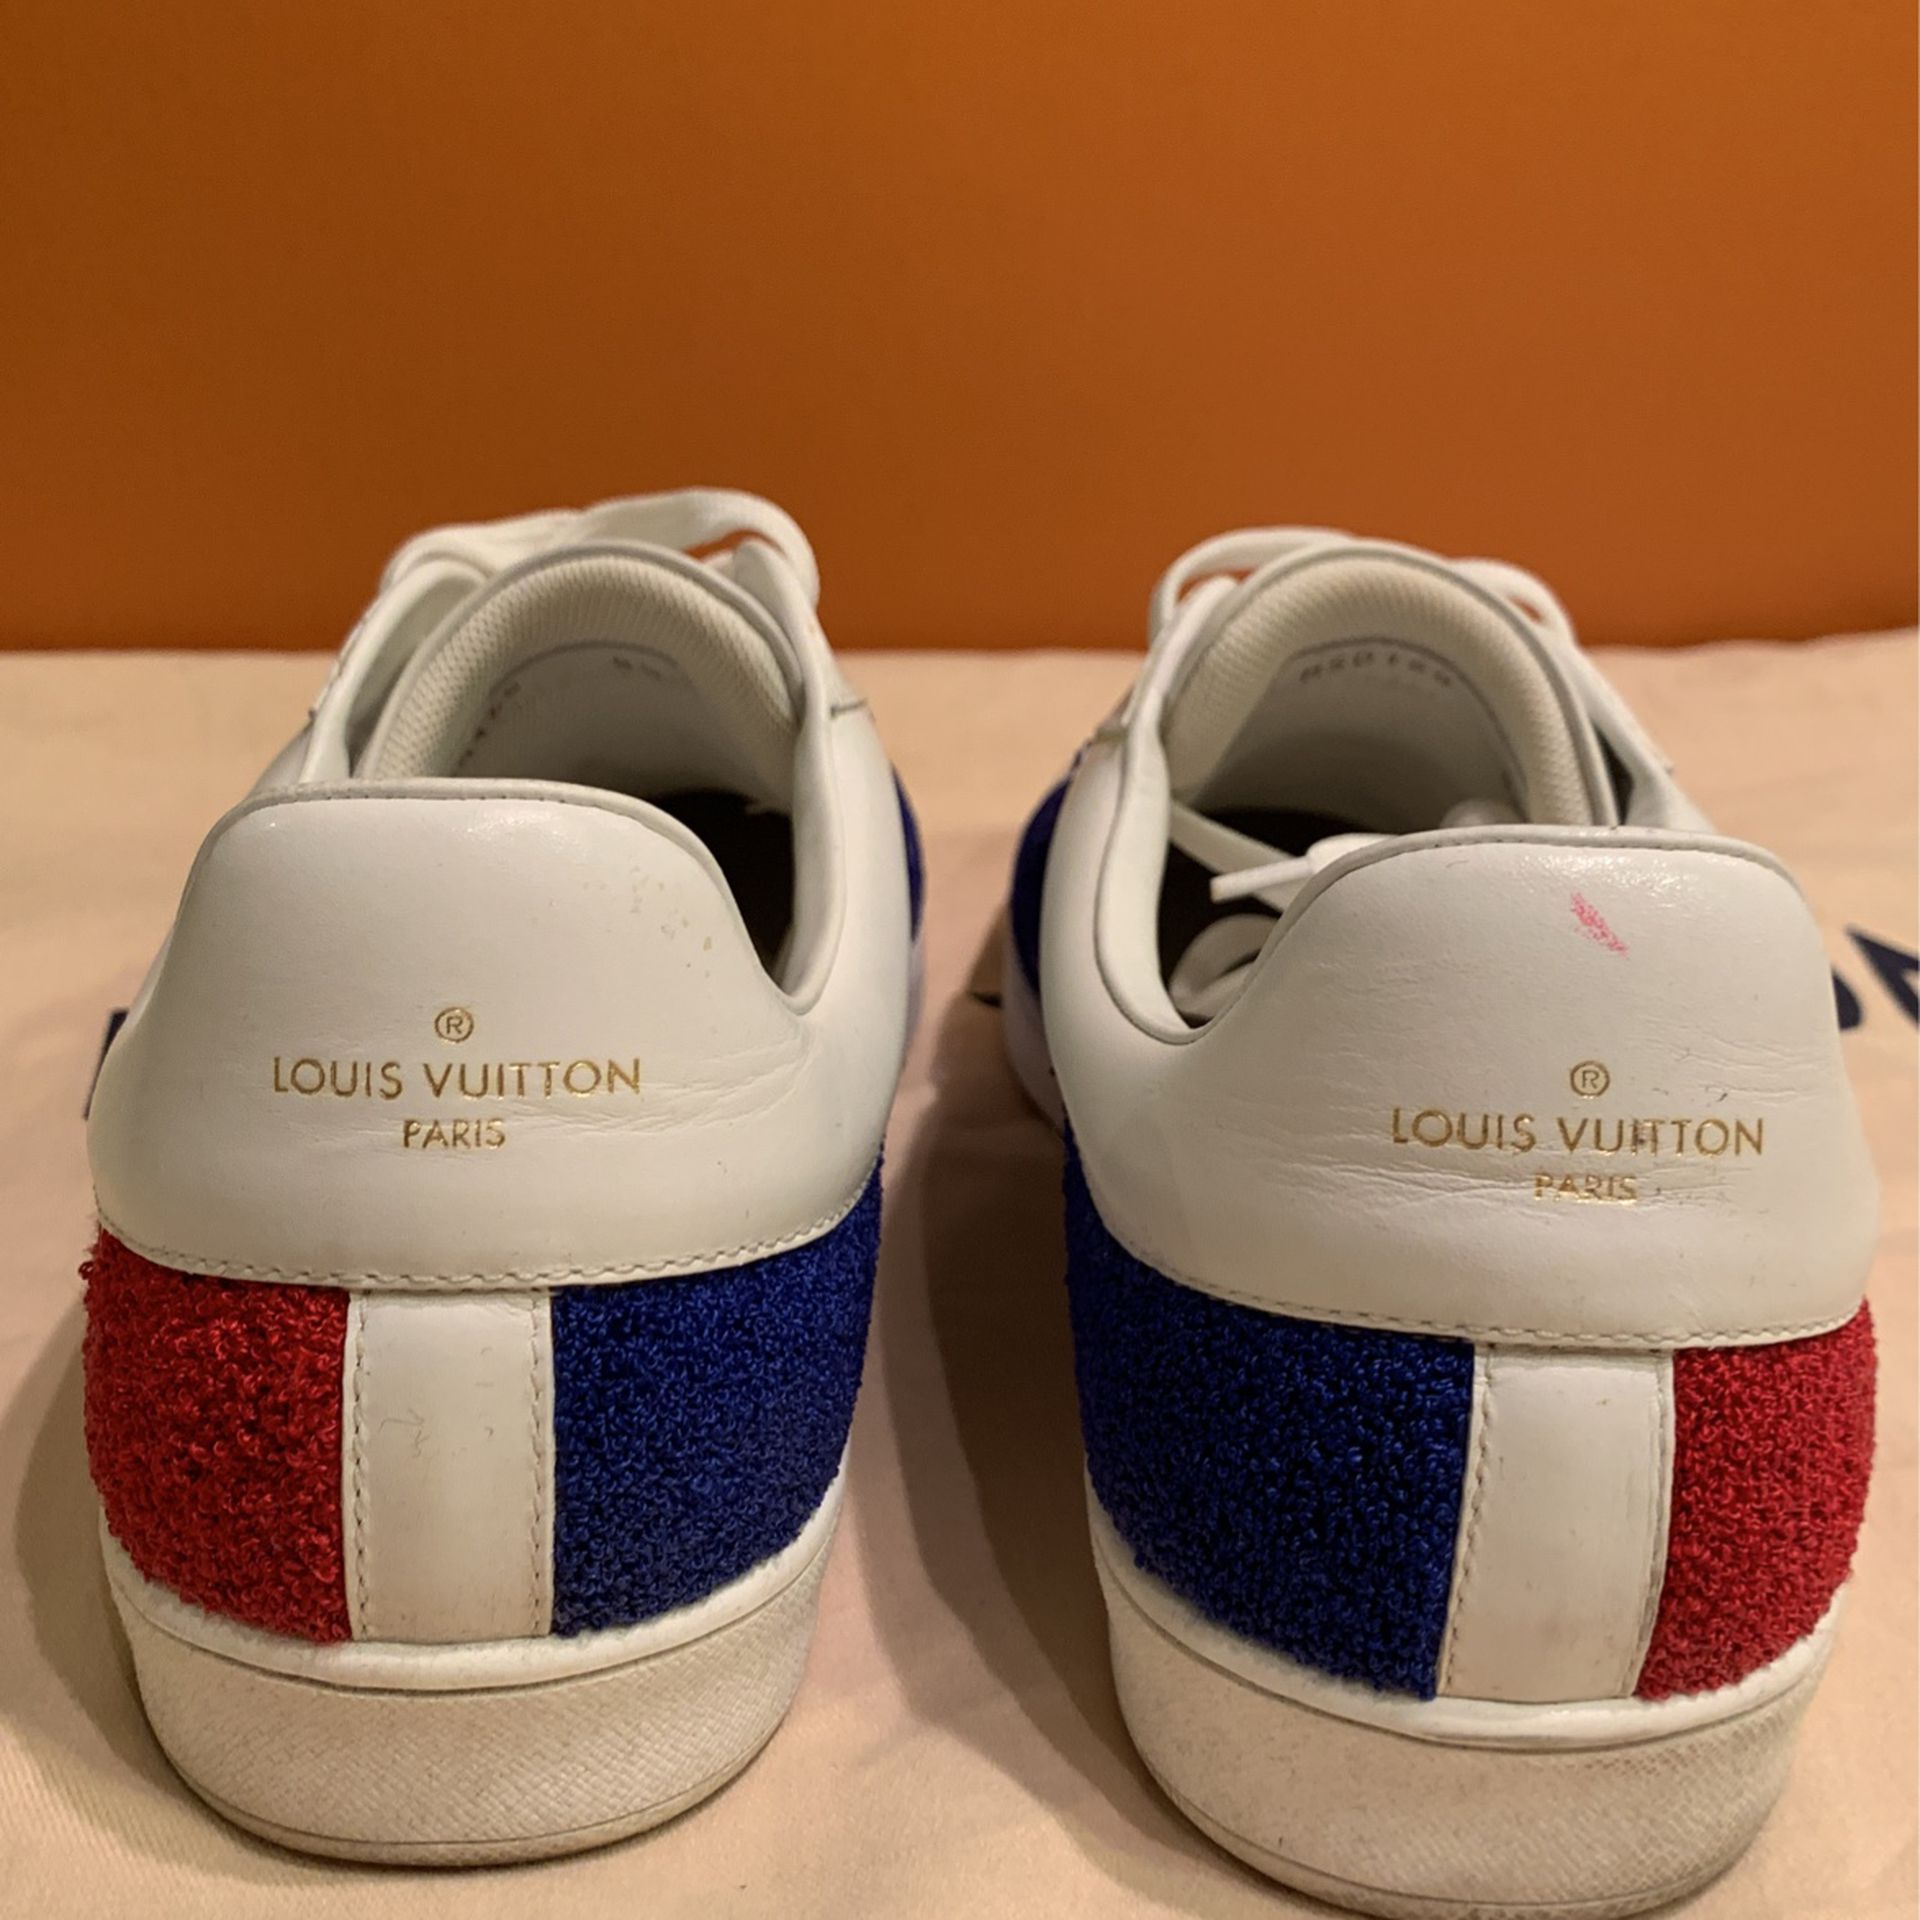 LOUIS VUITTON MENS SHOES SIZE 10 USA SIZE 8 ITALY for Sale in Santa Ana, CA  - OfferUp